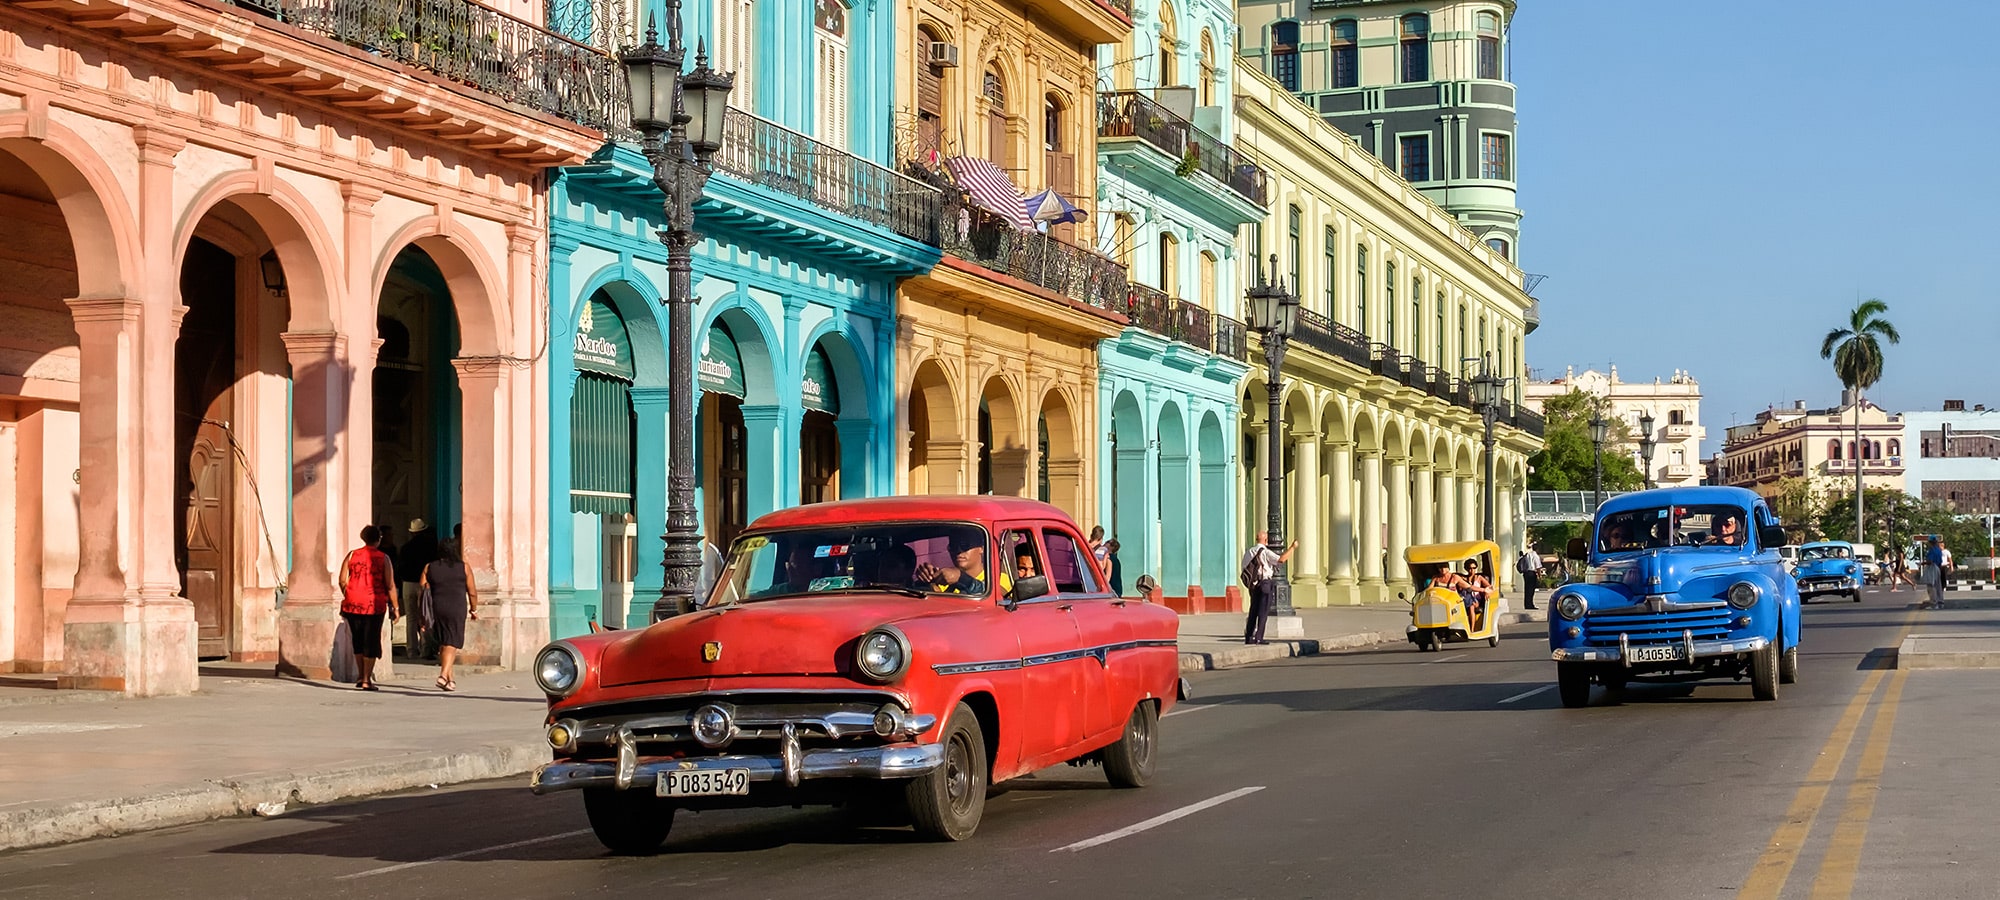 With all the restrictions surrounding travel to Cuba for U.S. citizens, opting for a cruise can help ease the process. But you should still do your homework before booking.